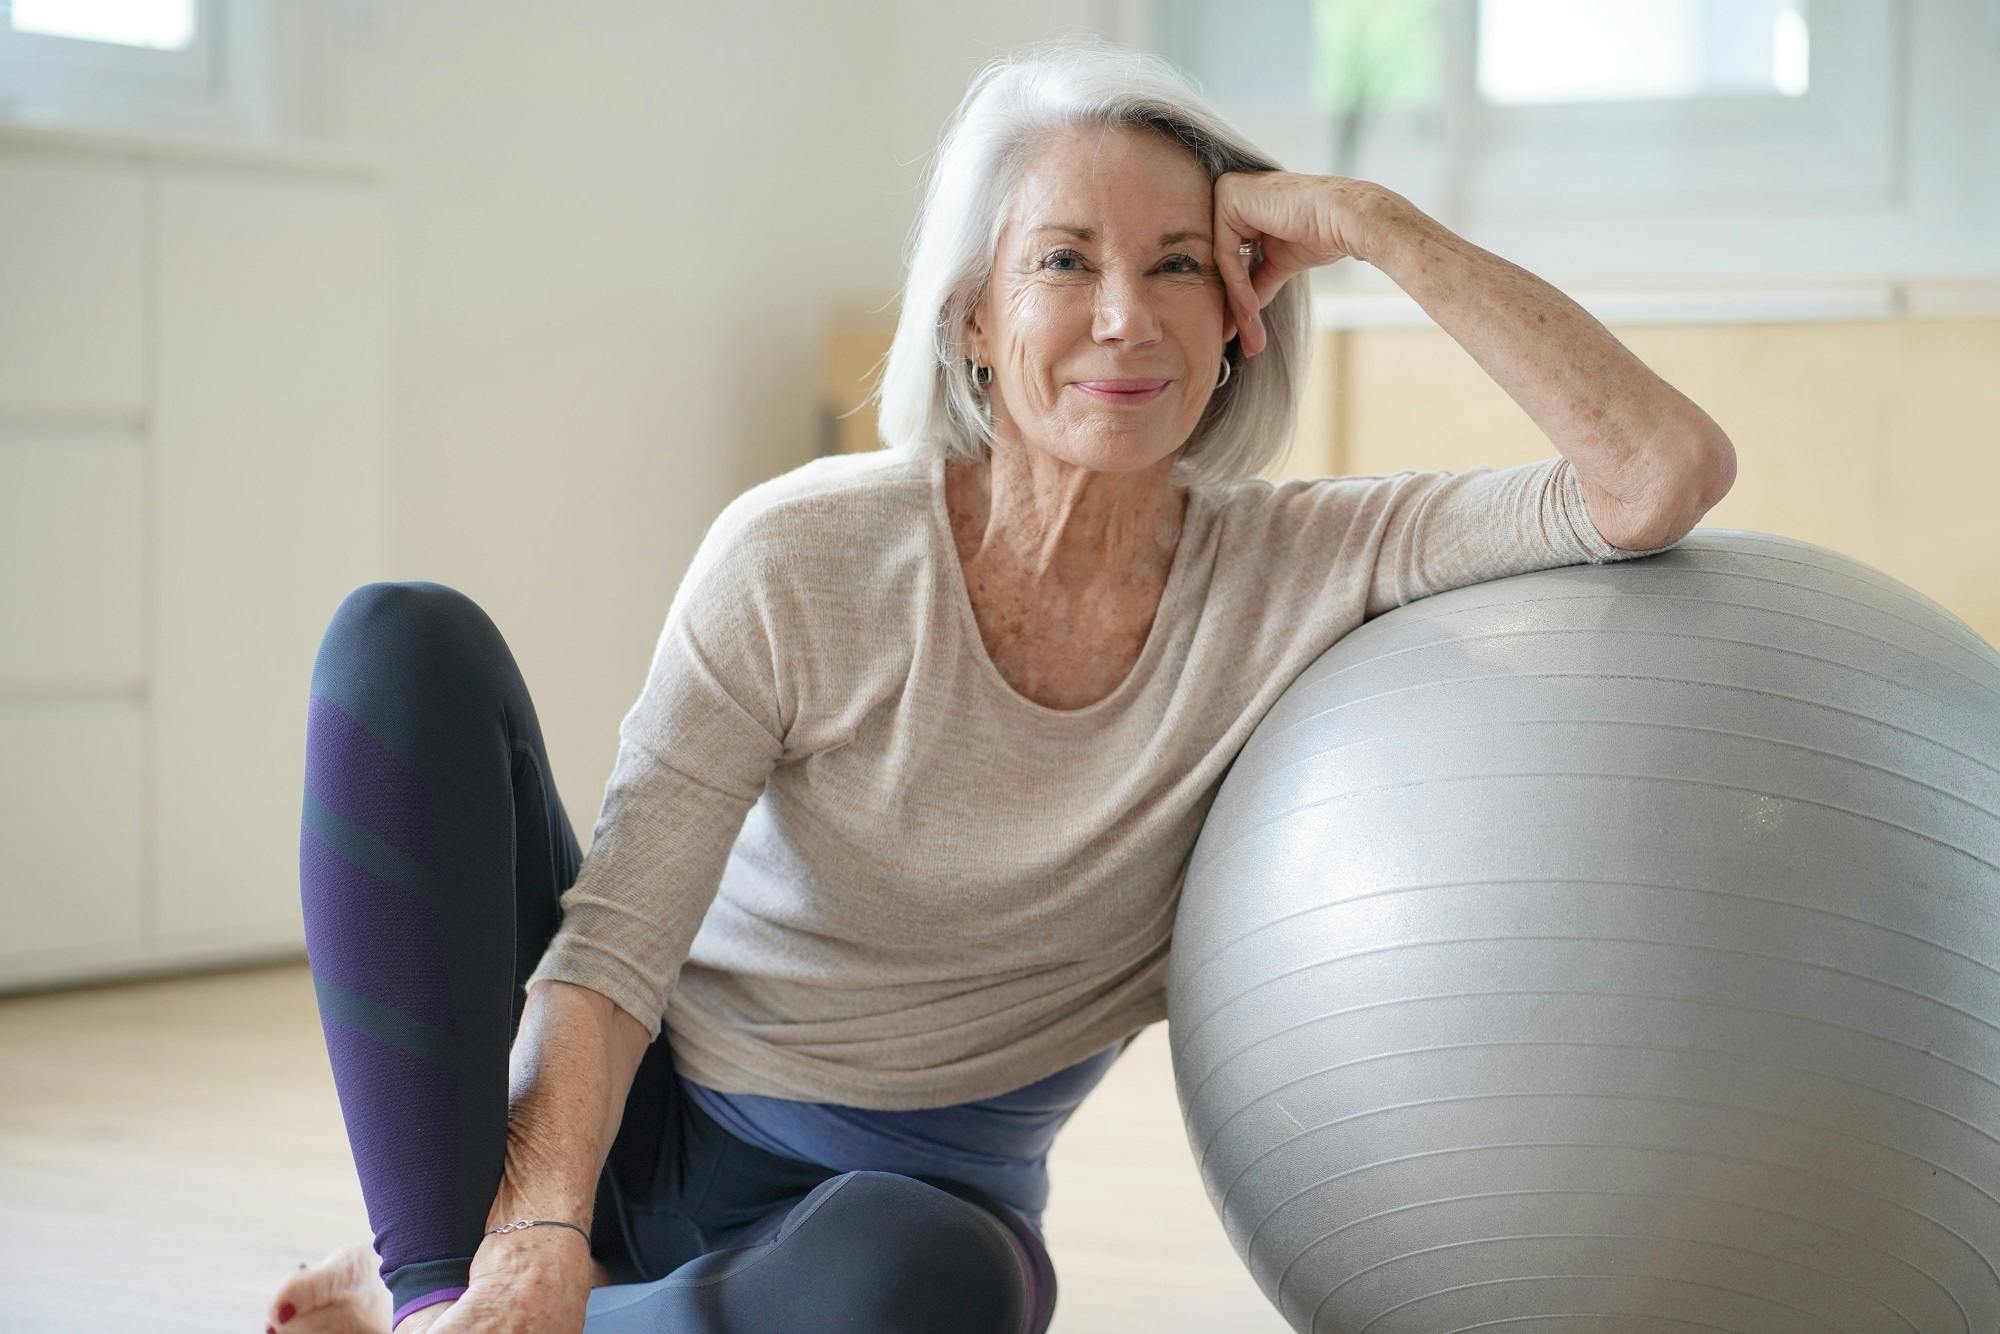 Older woman smiles during fitness training with exercise ball.